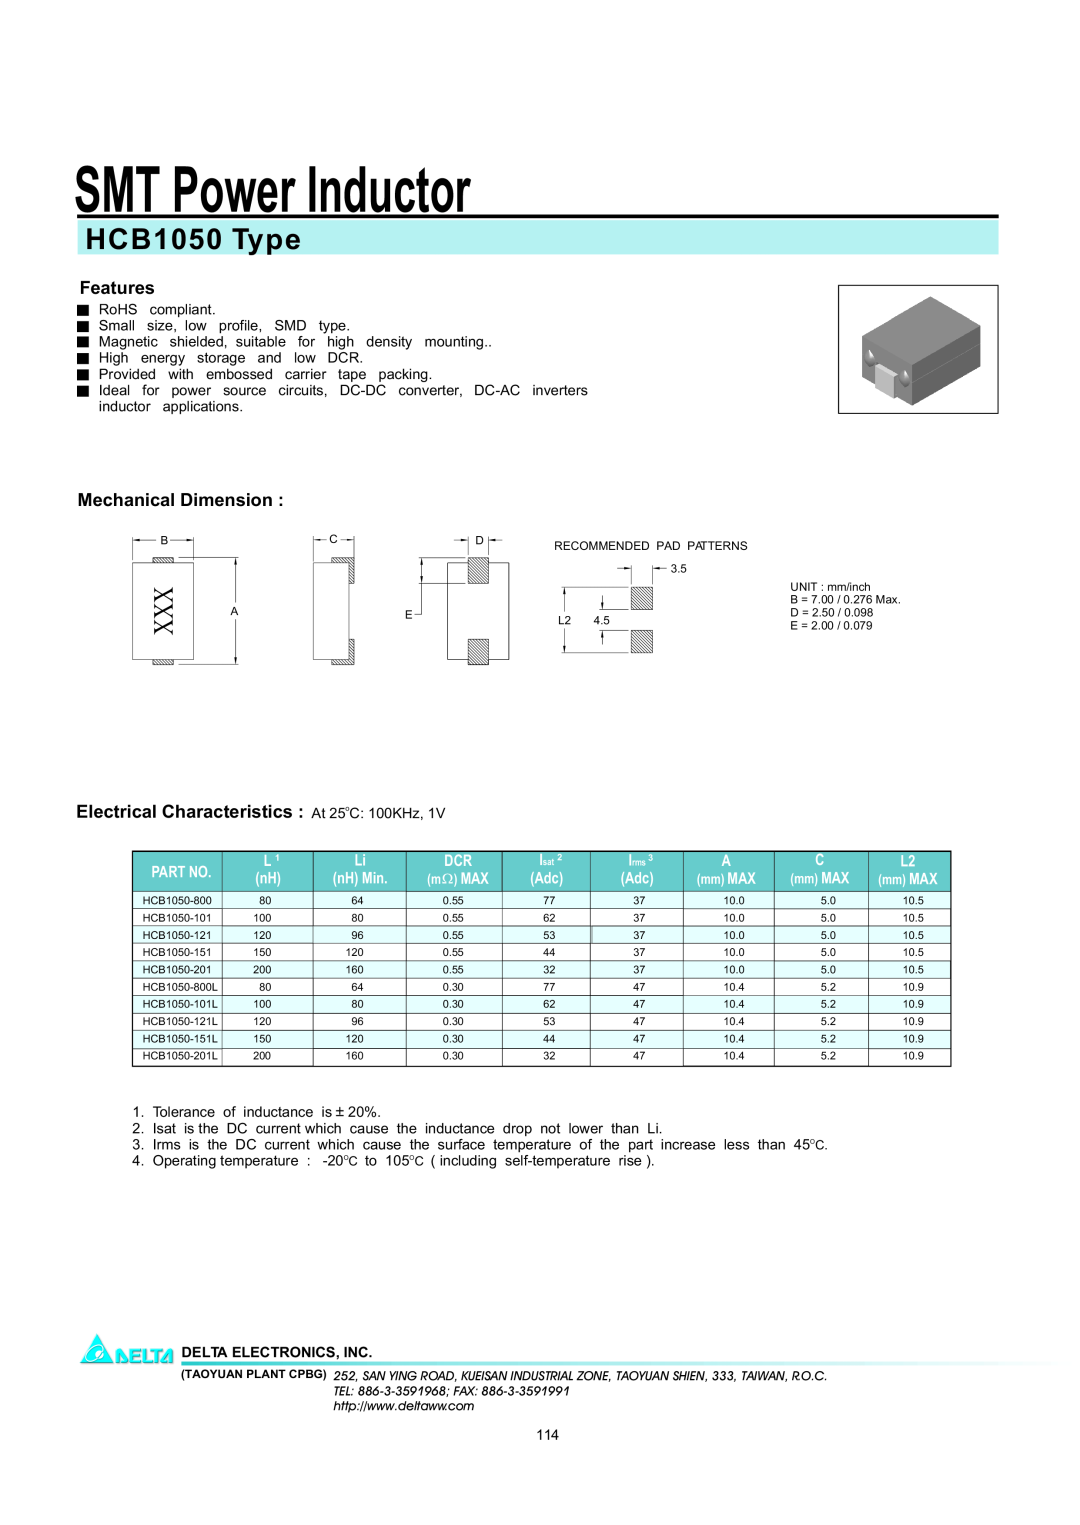 Delta Electronics manual SMT Power Inductor, HCB1050 Type, Features, Mechanical Dimension, Delta Electronics, Inc 